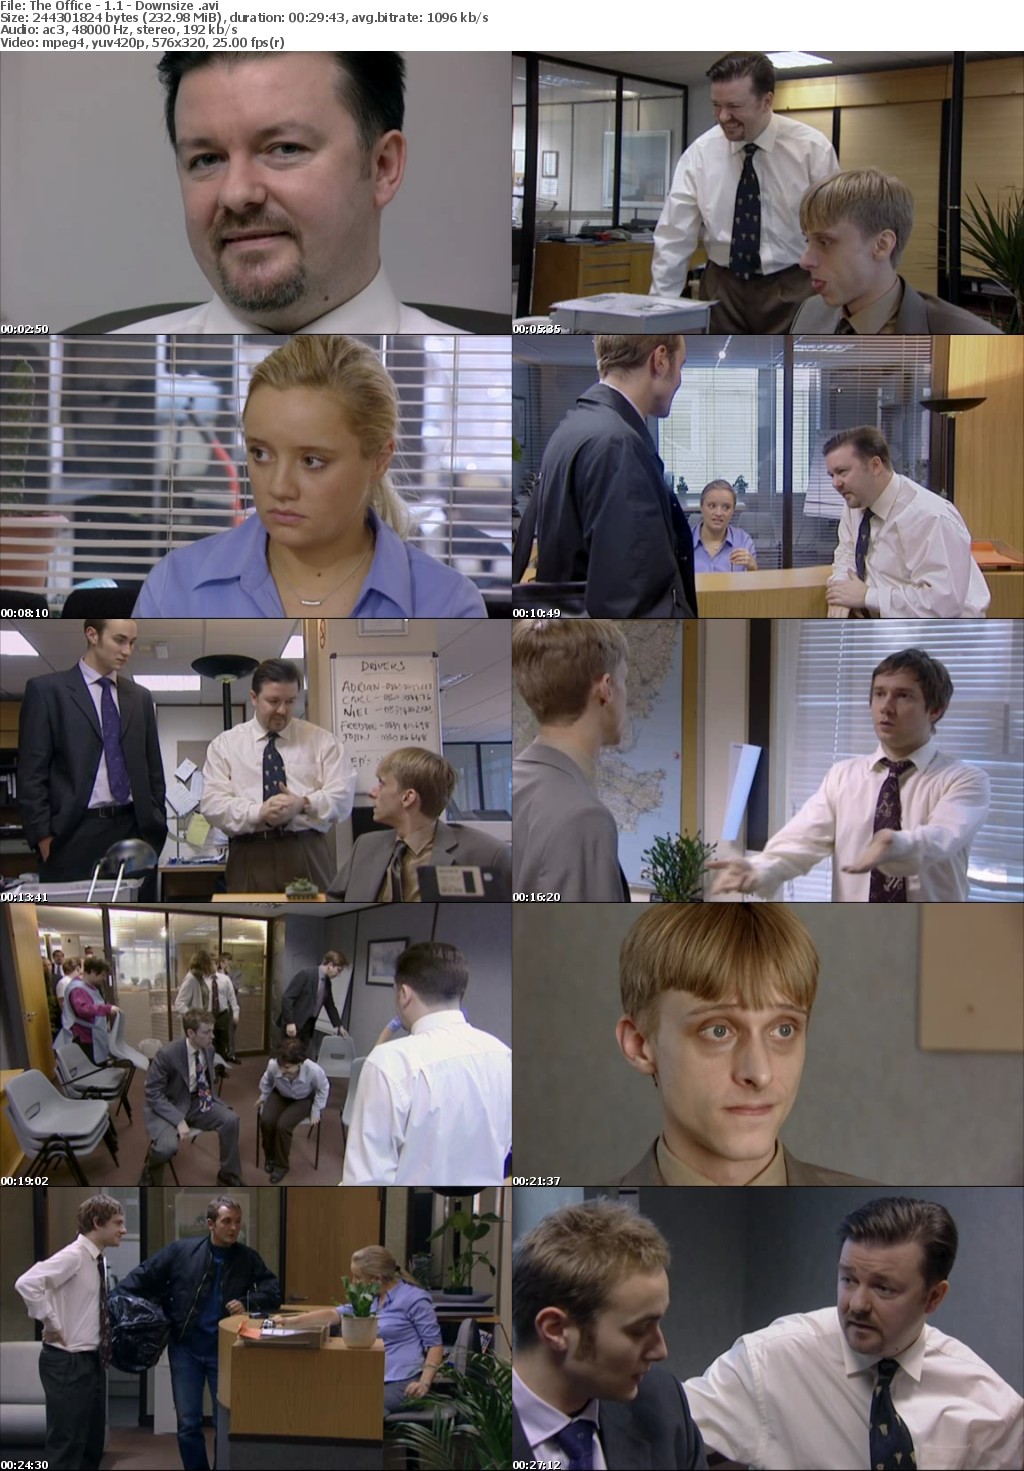 The Office Series 1 + 2 Christmas Specials And Extras (UK)